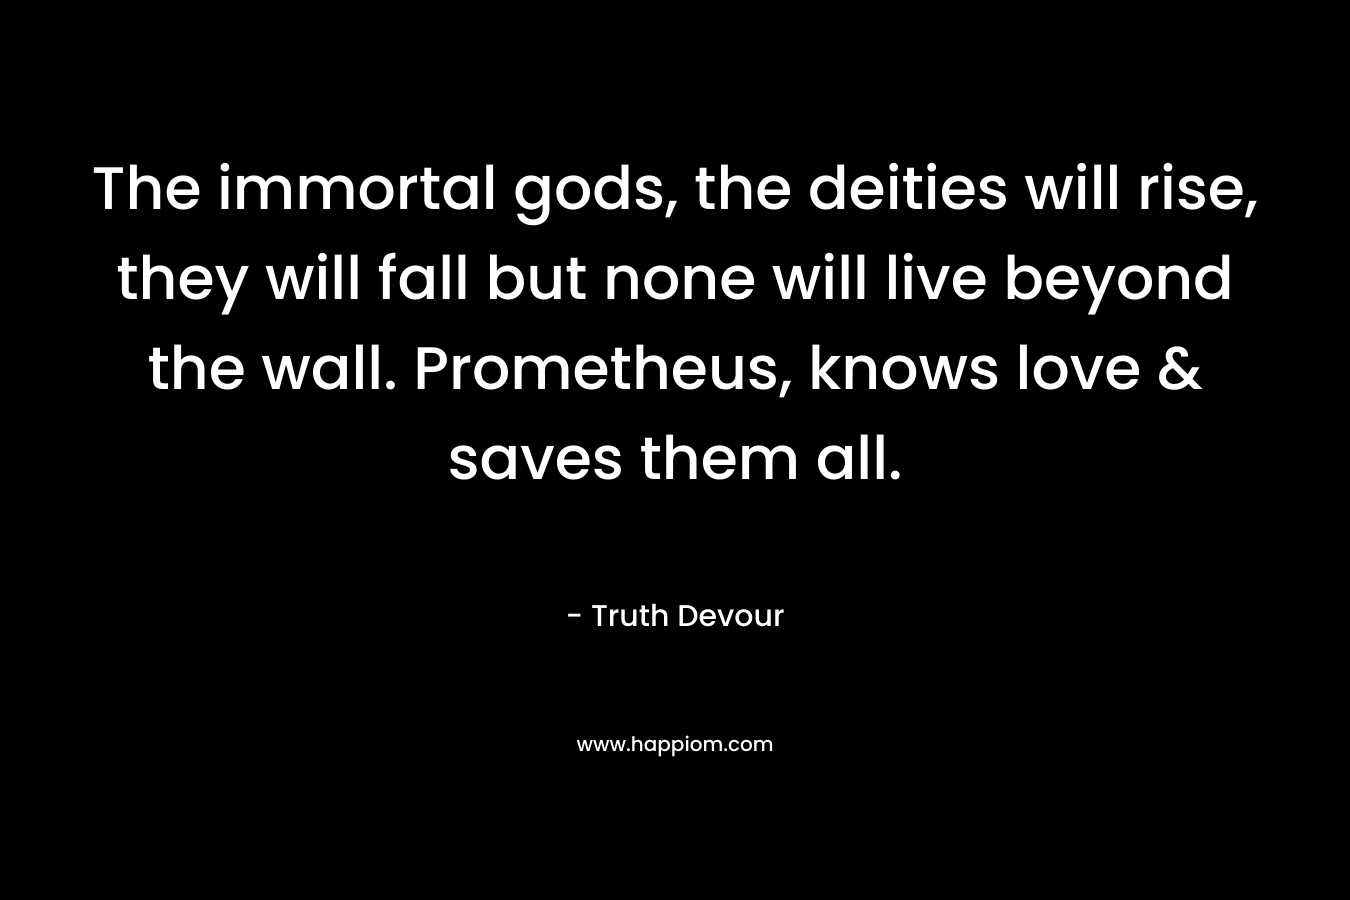 The immortal gods, the deities will rise, they will fall but none will live beyond the wall. Prometheus, knows love & saves them all.